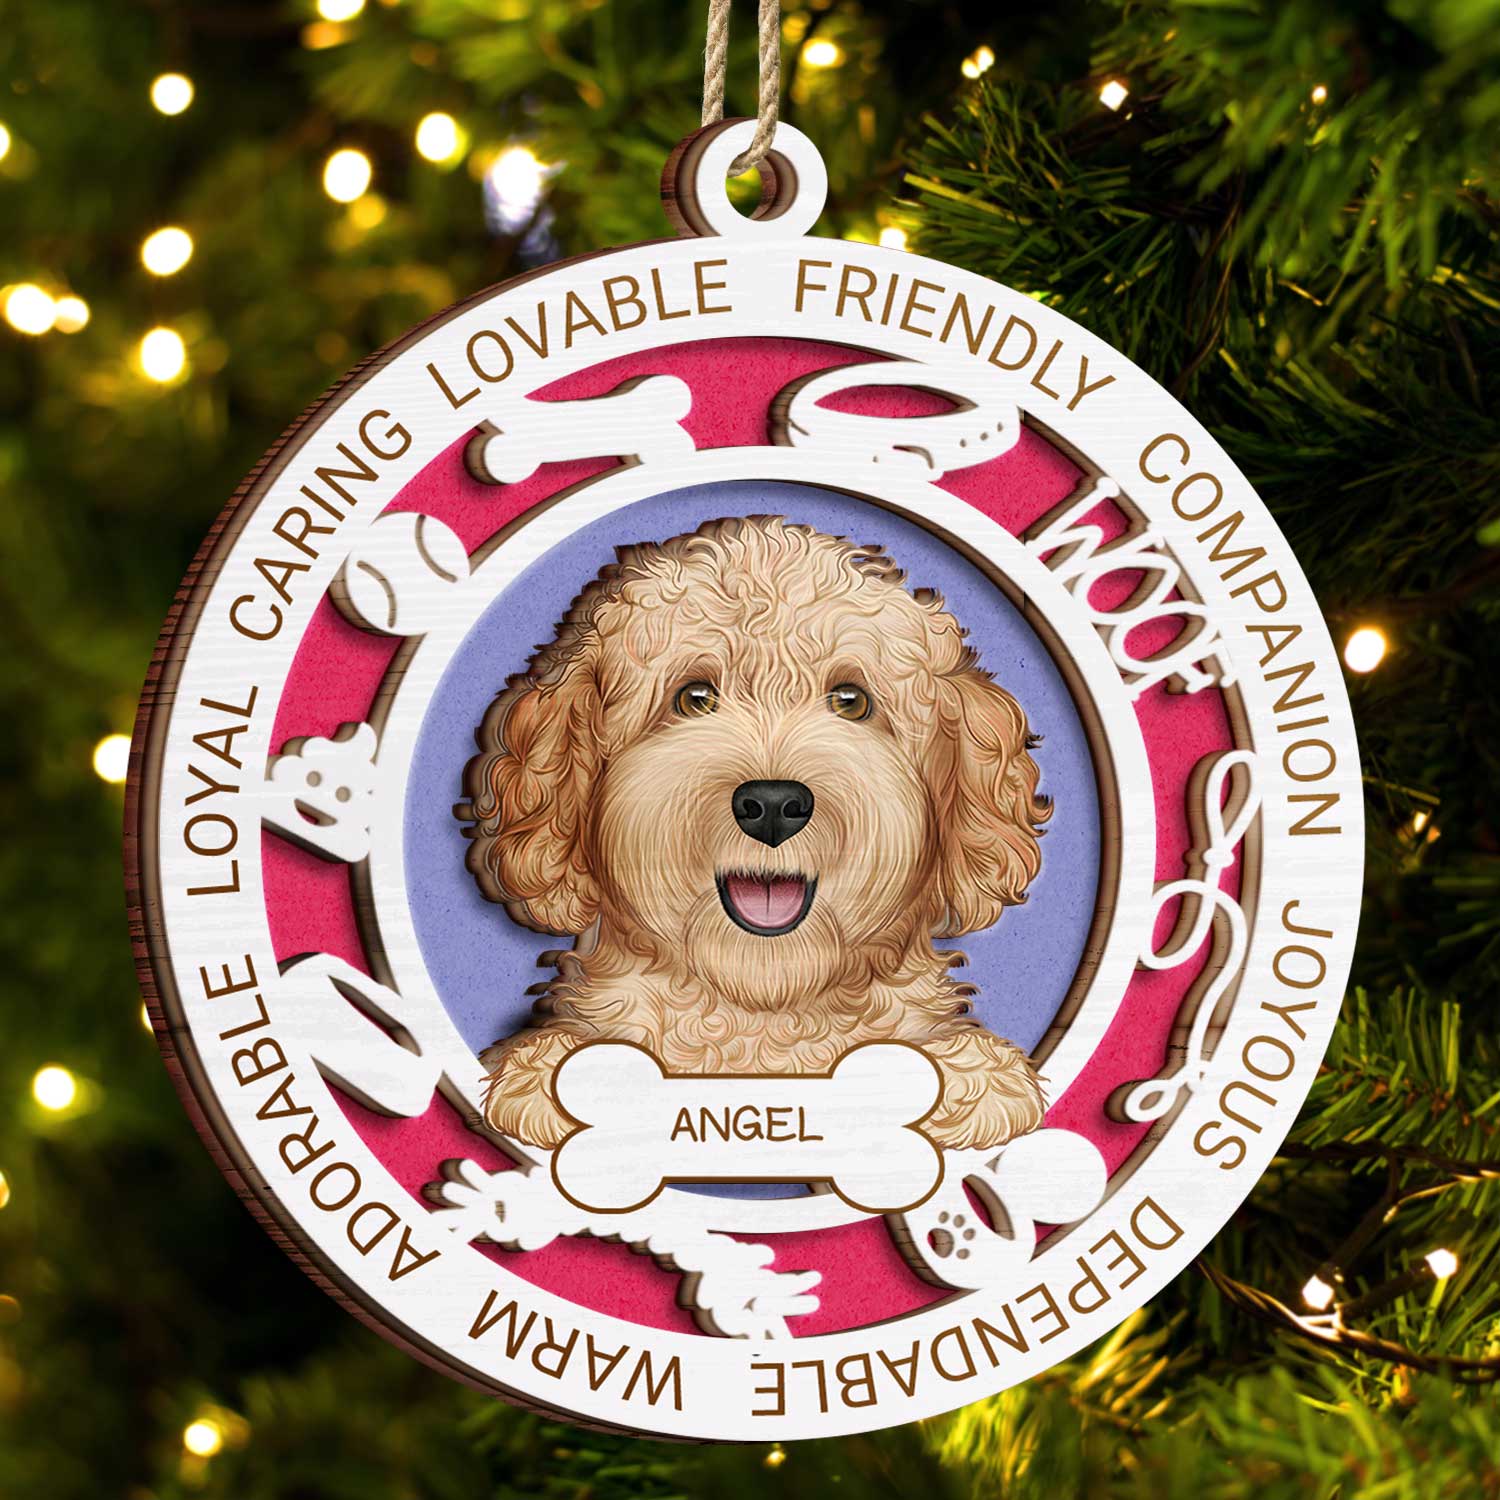 Adorable Loyal Friendly - Christmas Gift For Dog Lovers - Personalized 2-Layered Wooden Ornament